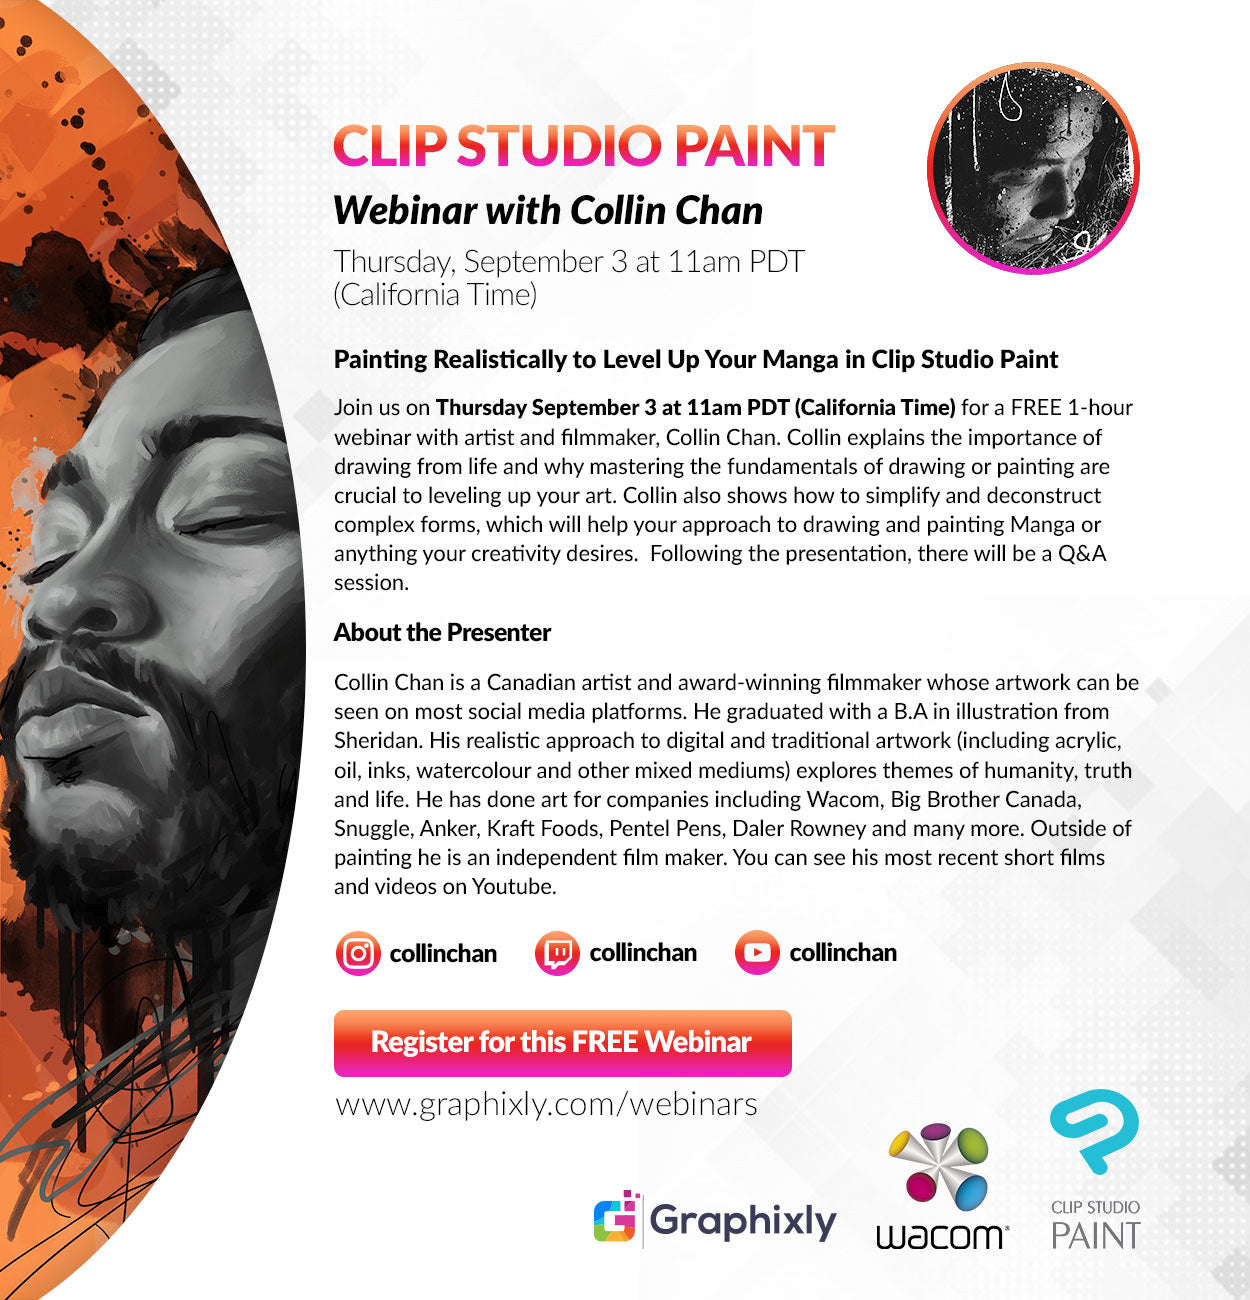 Webinar - “Painting Realistically to Level Up Your Manga in Clip Studio Paint” with Collin Chan